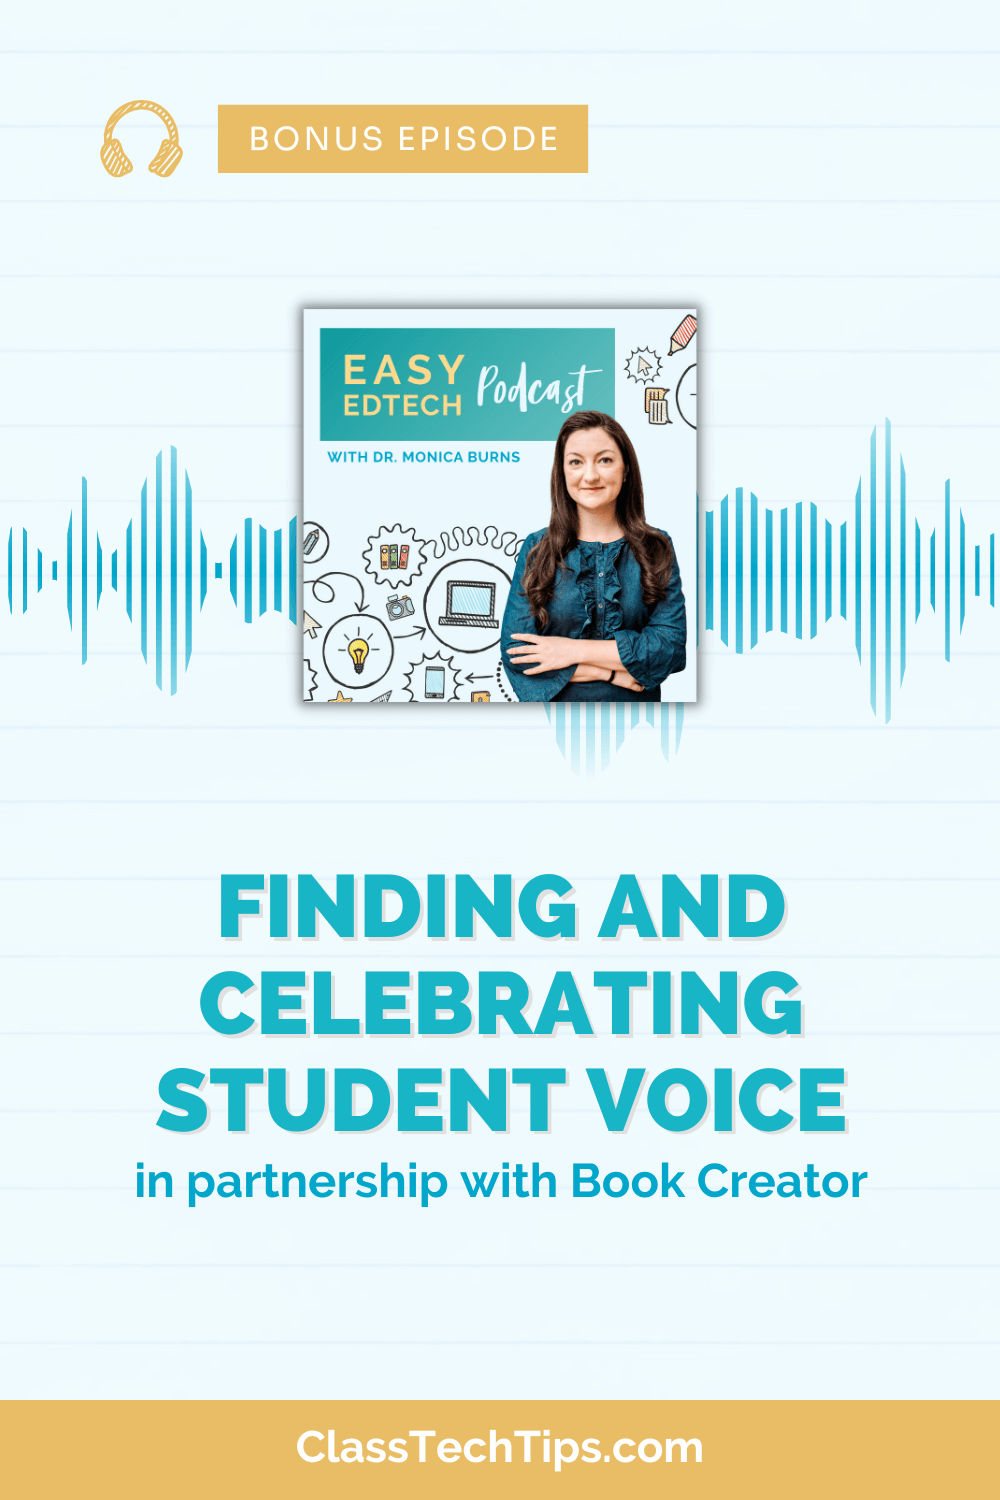 Promotional graphic for a special episode of the "Easy EdTech Podcast" by Dr. Monica Burns, focusing on student engagement with Book Creator. It features a white backdrop with teal and blue accents including a sound wave pattern. The host's picture is alongside doodles related to technology in education. Text highlights the episode's theme of 'Finding and Celebrating Student Voice.'